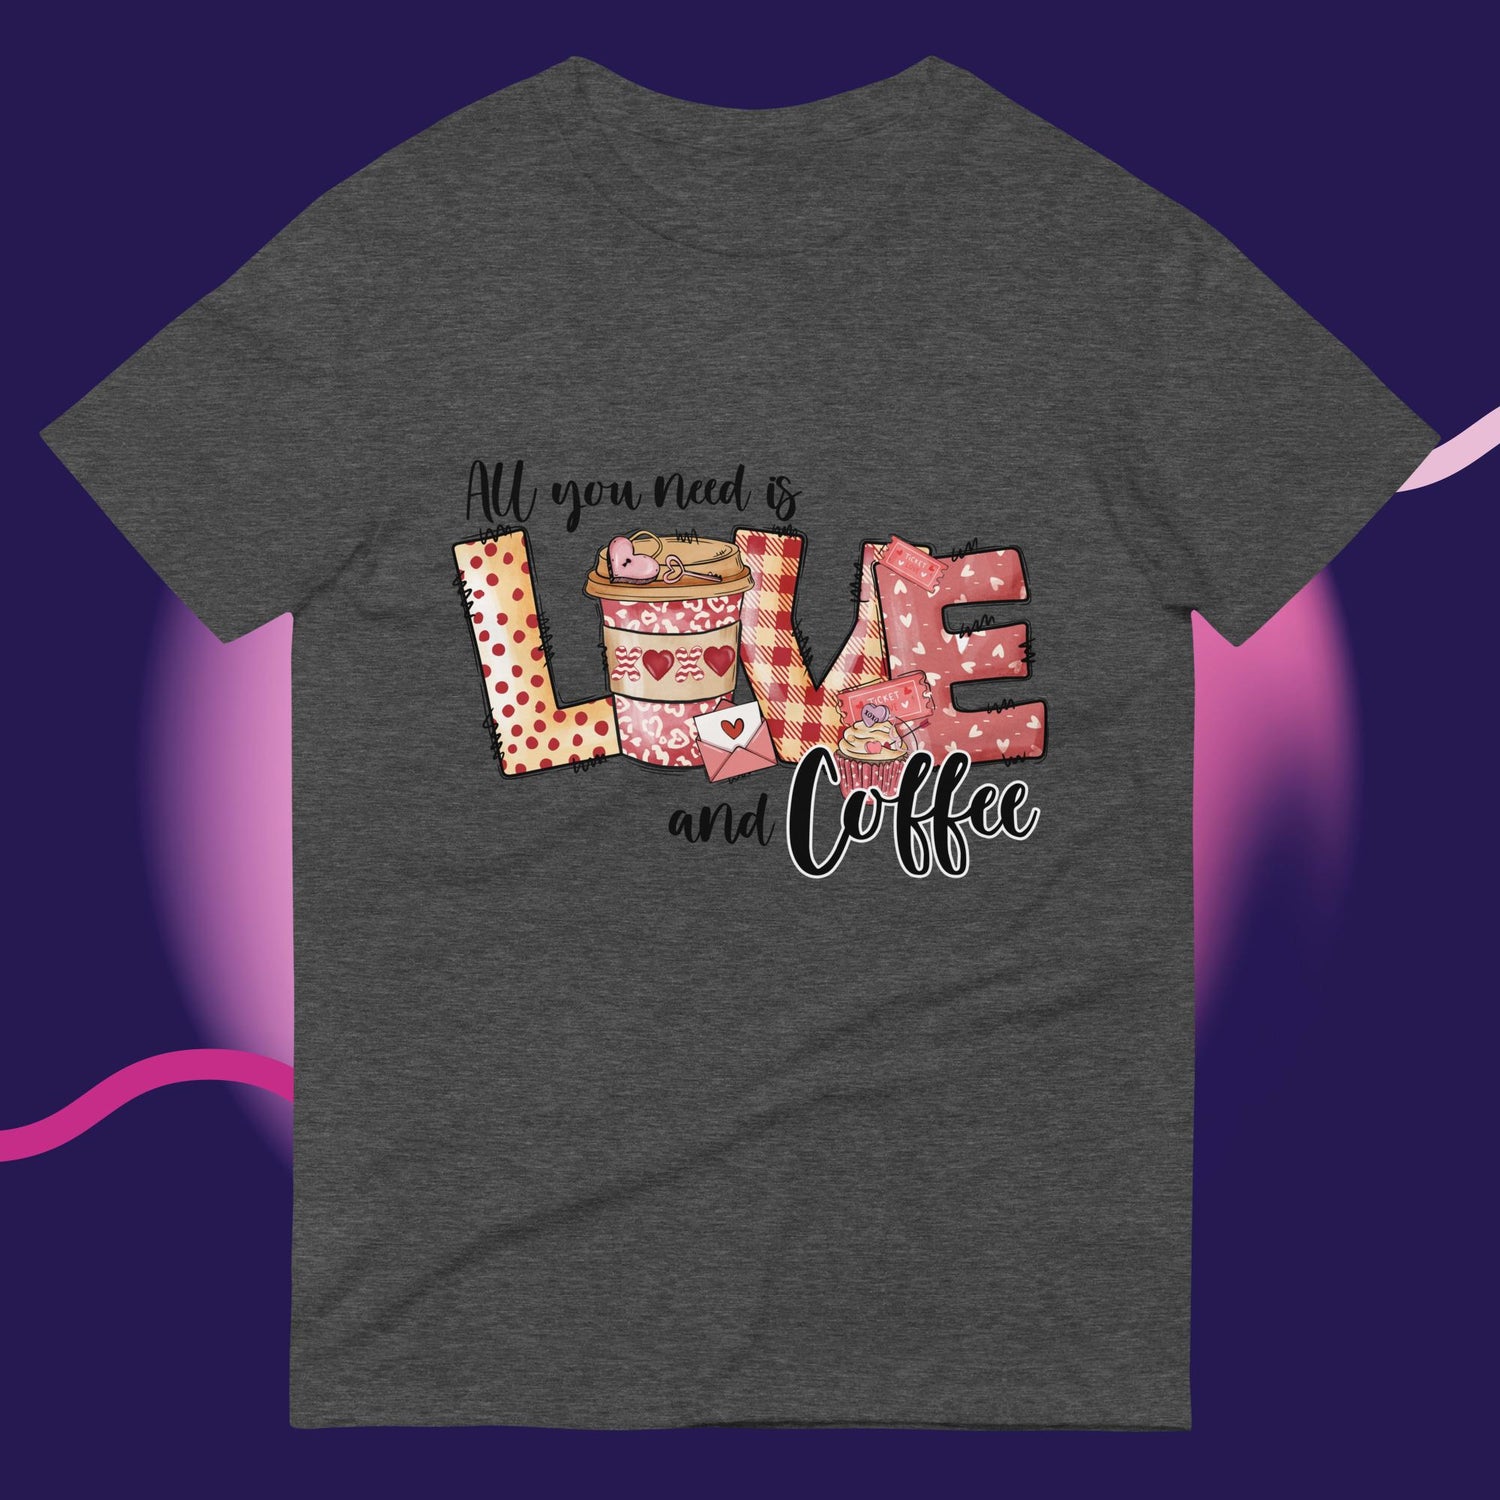 Sparkle-kiss-creations-all-you-need-is-love-coffee-t-shirt-gray